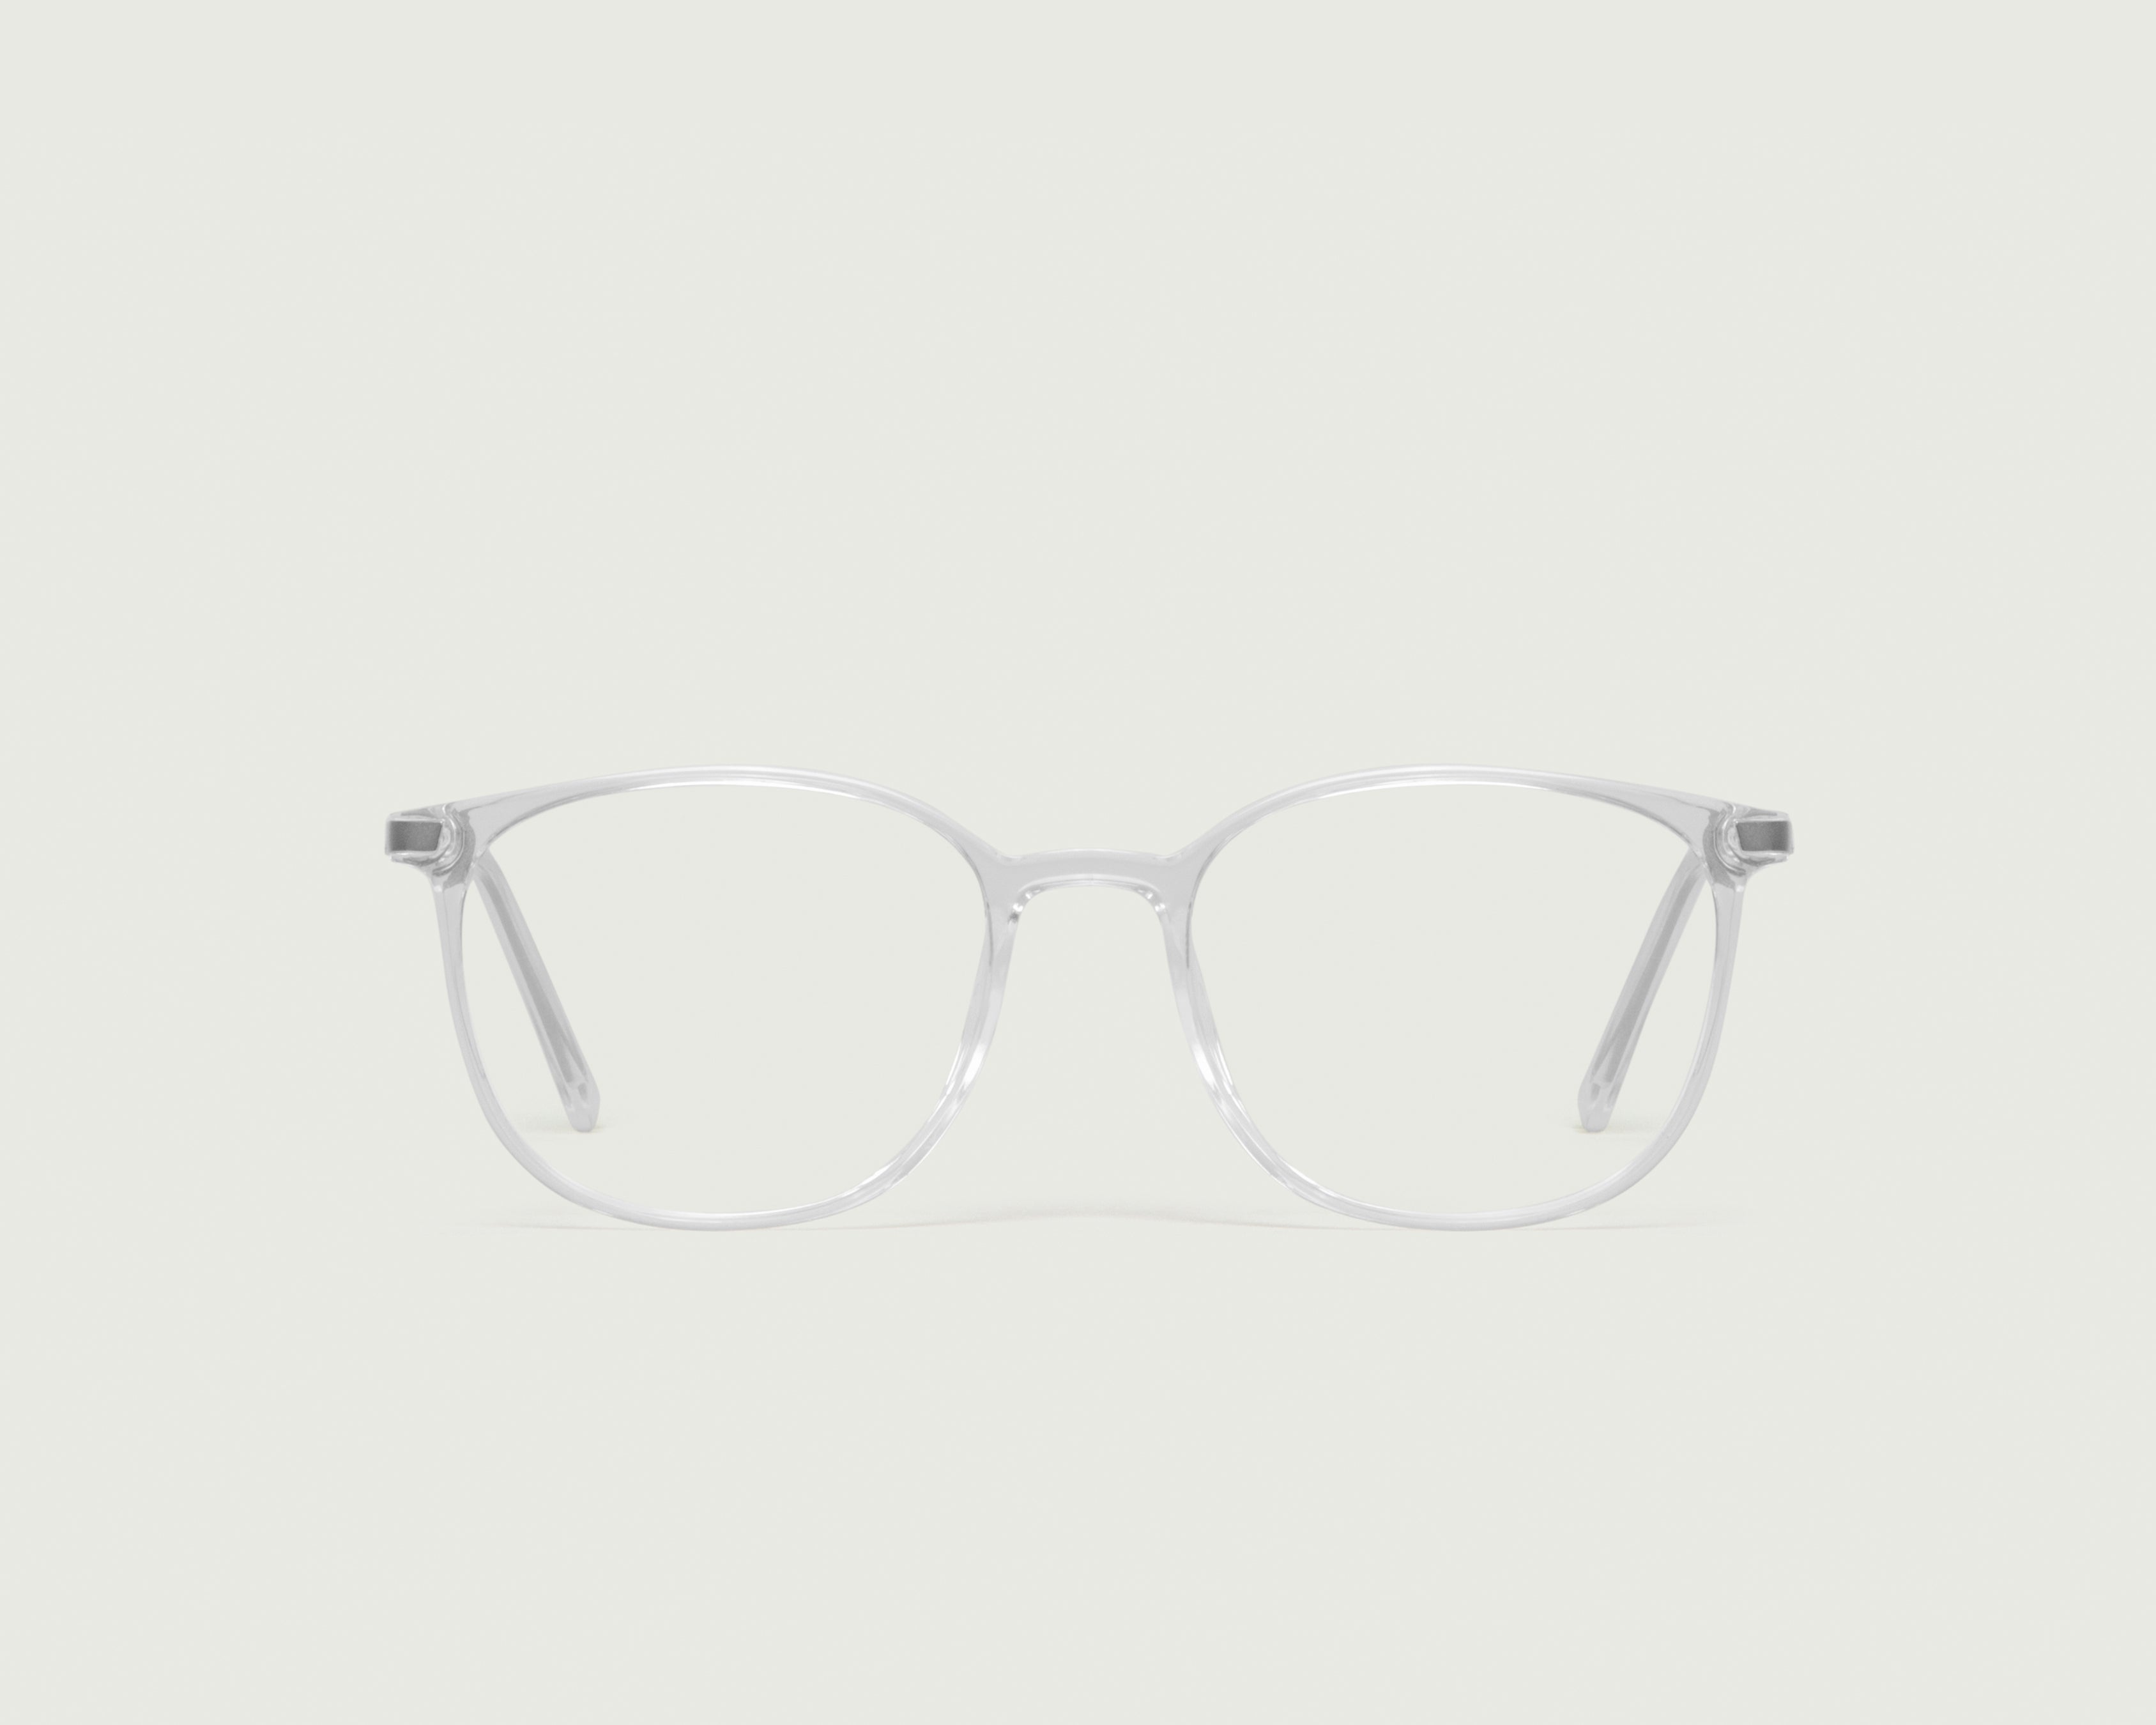 Crystal::Alexi Eyeglasses round clear plastic front